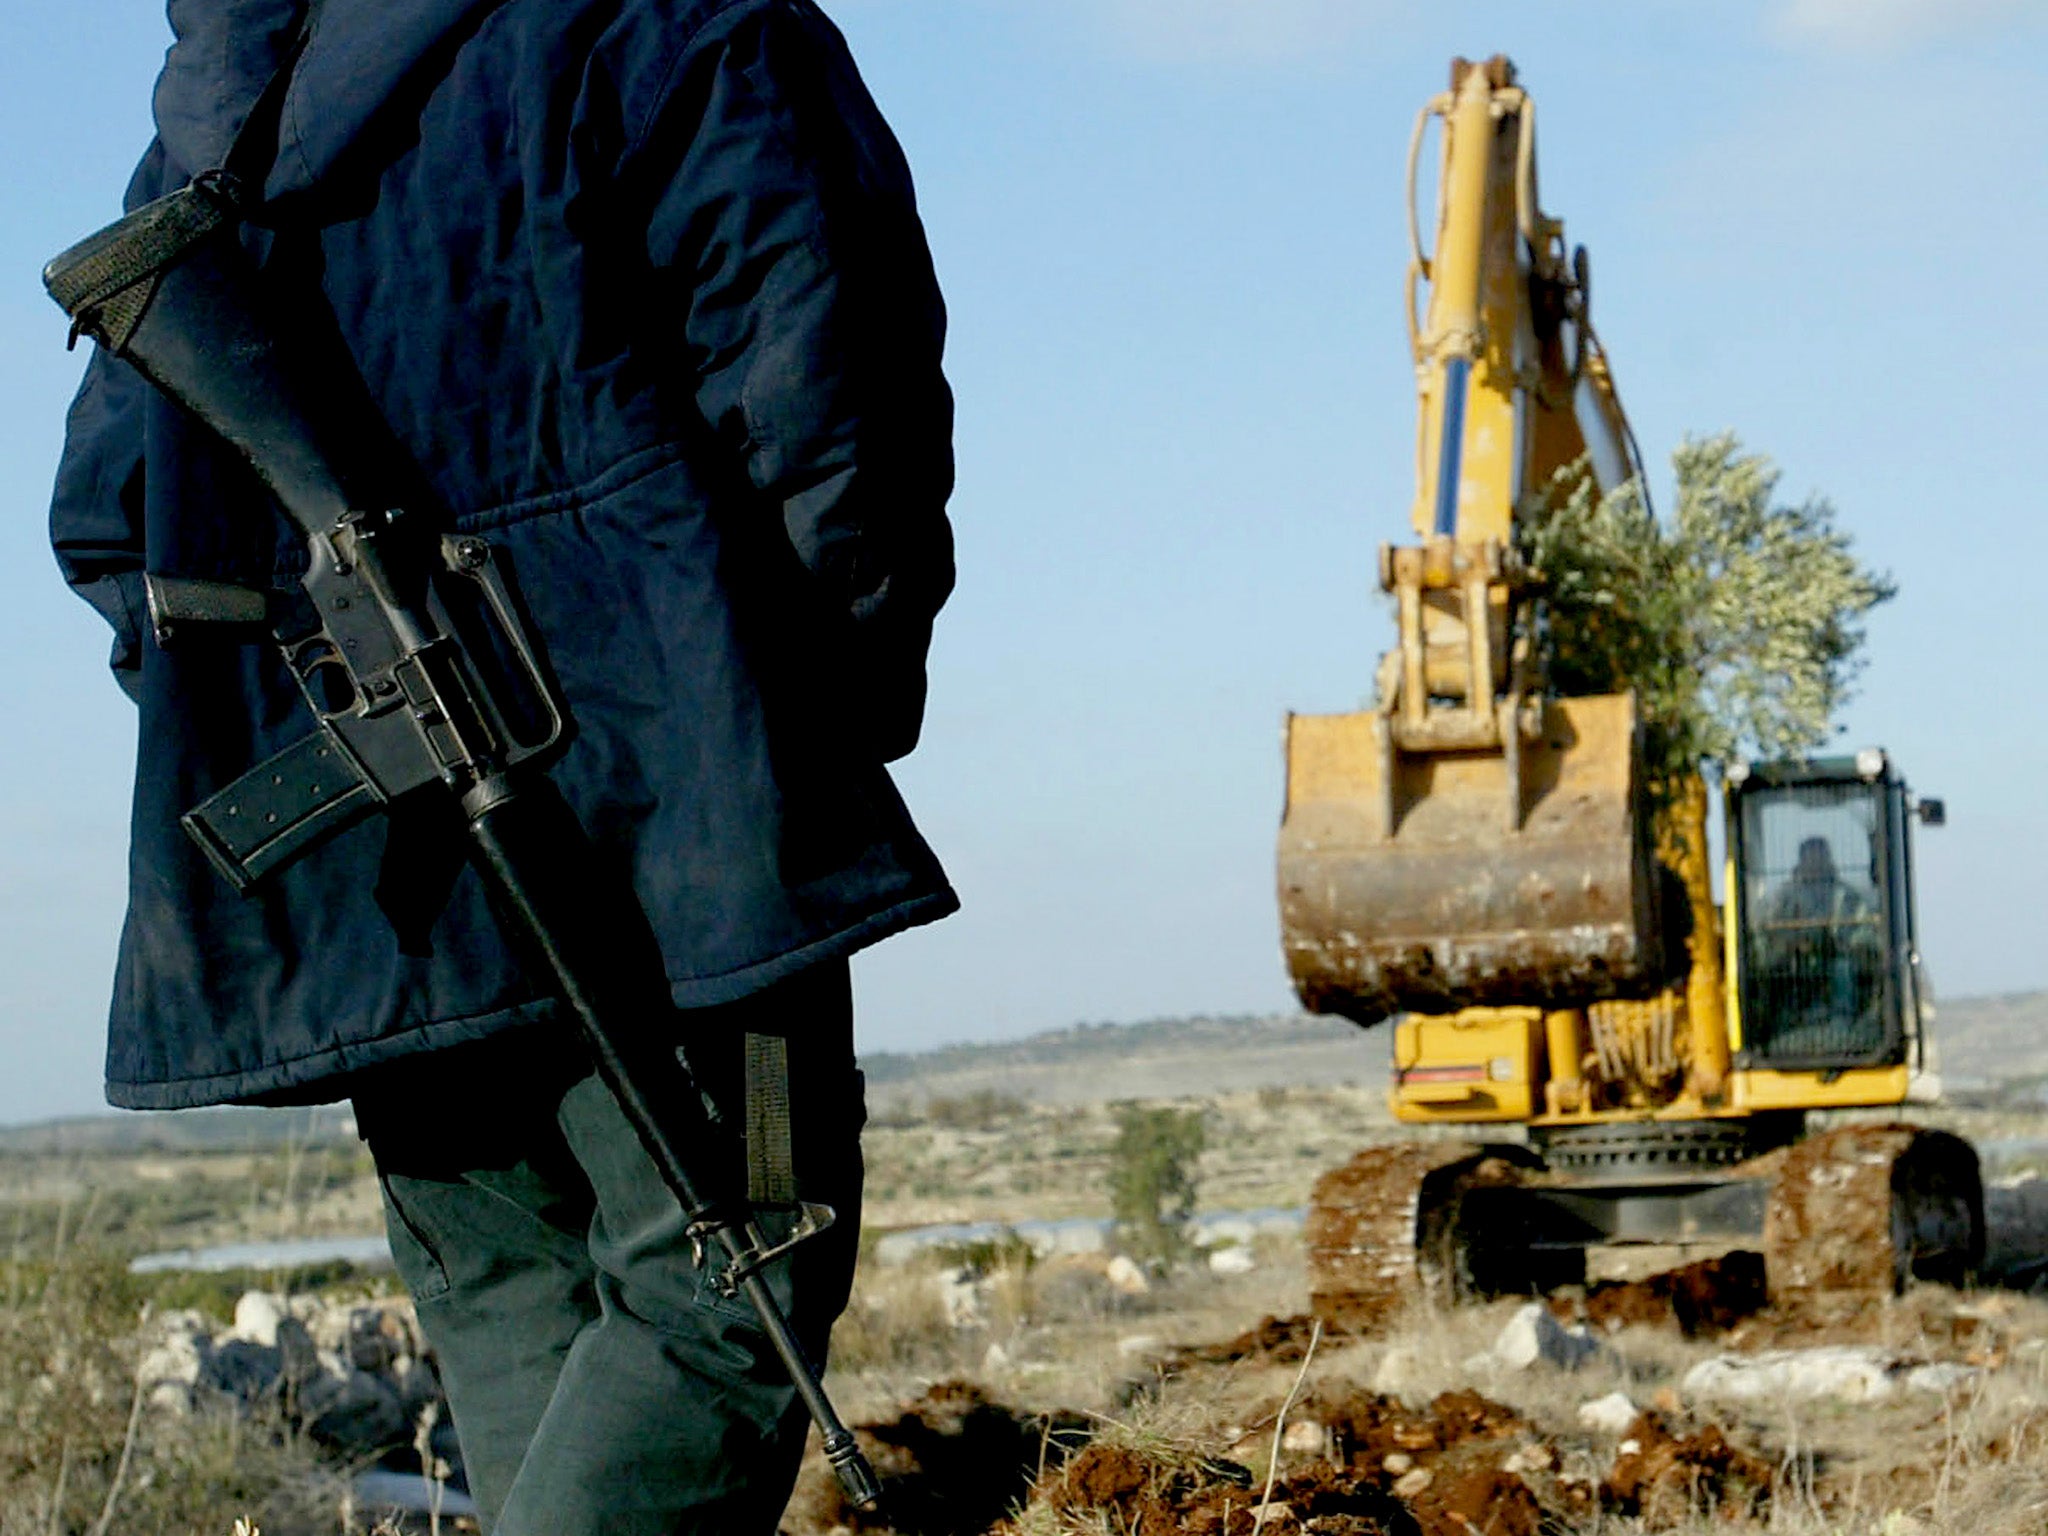 An armed Israeli stands guard as a hydraulic excavator uproots olive trees from a Palestinian property between the West Bank village of Jayyous and the nearby Israeli settlement of Zufim